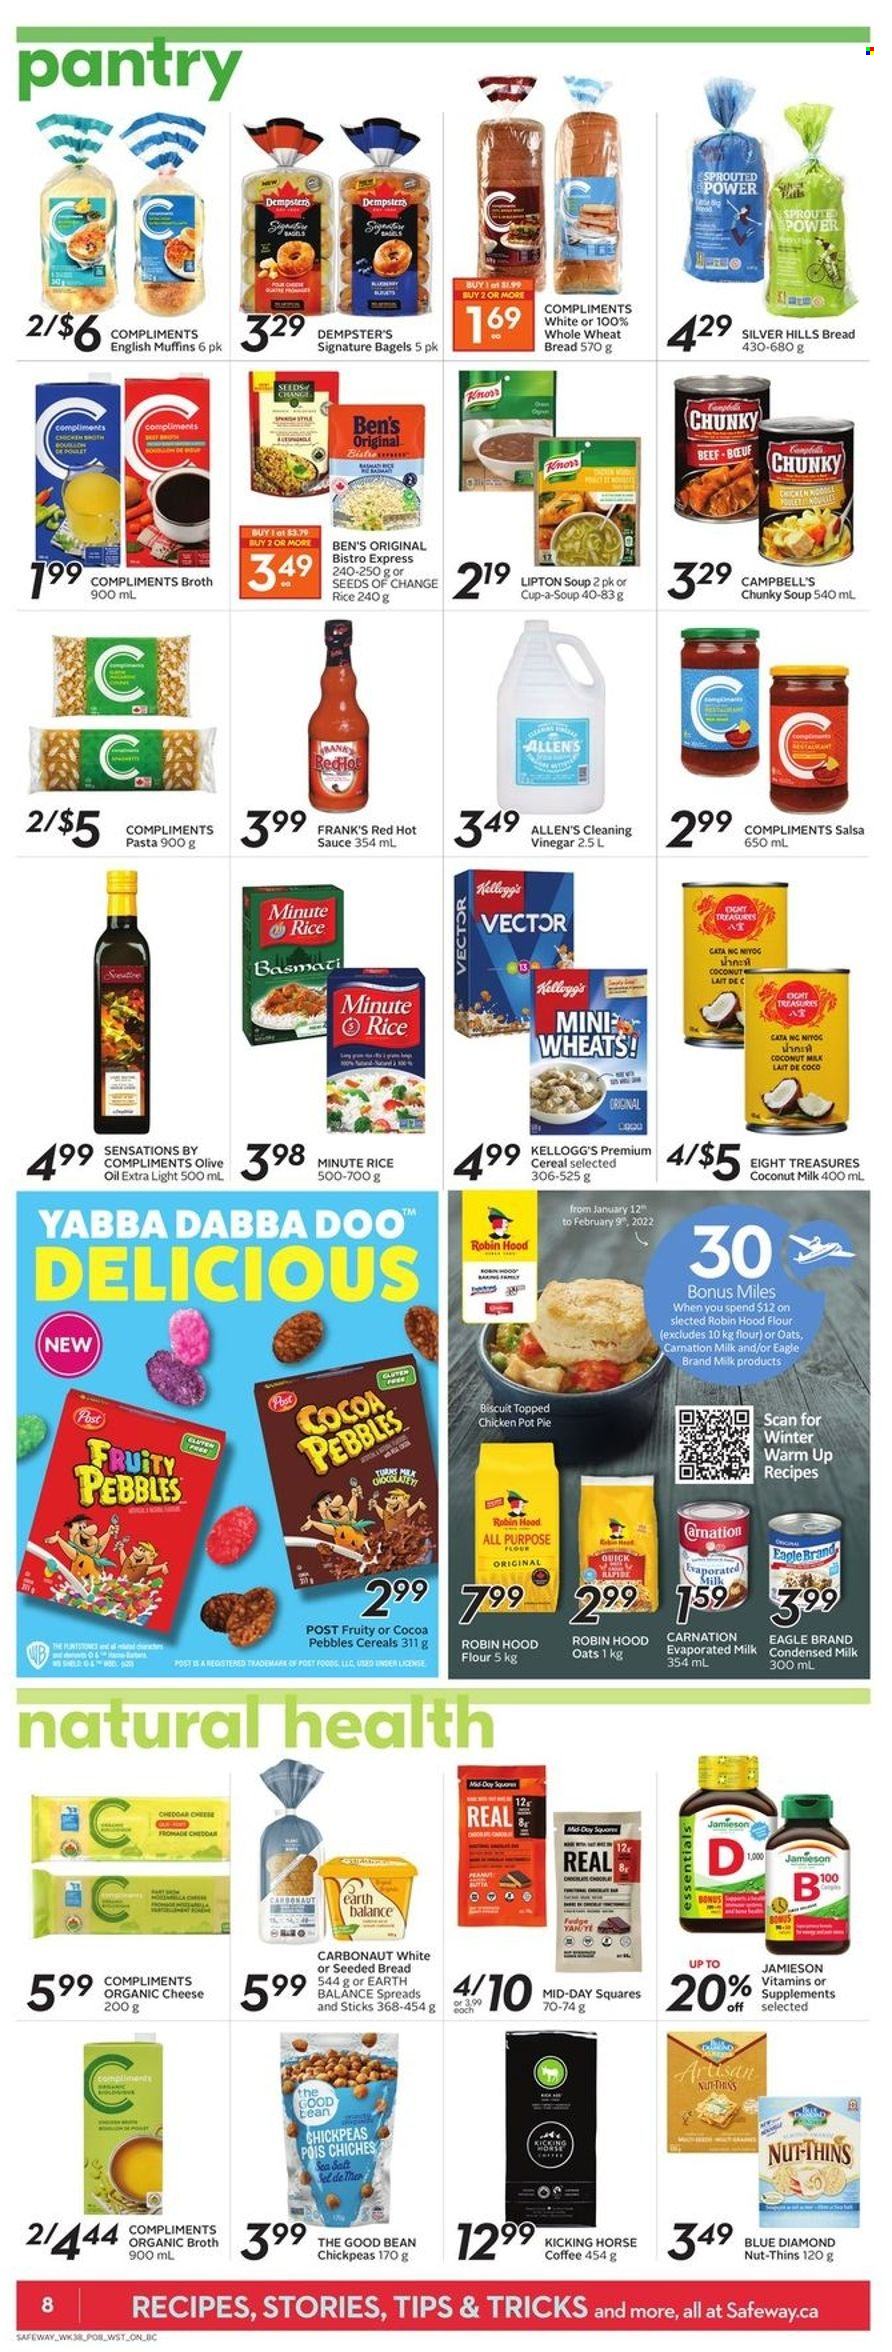 thumbnail - Safeway Flyer - January 13, 2022 - January 19, 2022 - Sales products - bagels, english muffins, wheat bread, pie, pot pie, Campbell's, soup, pasta, sauce, cheese, evaporated milk, condensed milk, Silk, Kellogg's, biscuit, Thins, flour, broth, coconut milk, cereals, Fruity Pebbles, rice, chickpeas, hot sauce, salsa, vinegar, olive oil, oil, Blue Diamond, coffee, Hill's, pot, Lipton. Page 9.